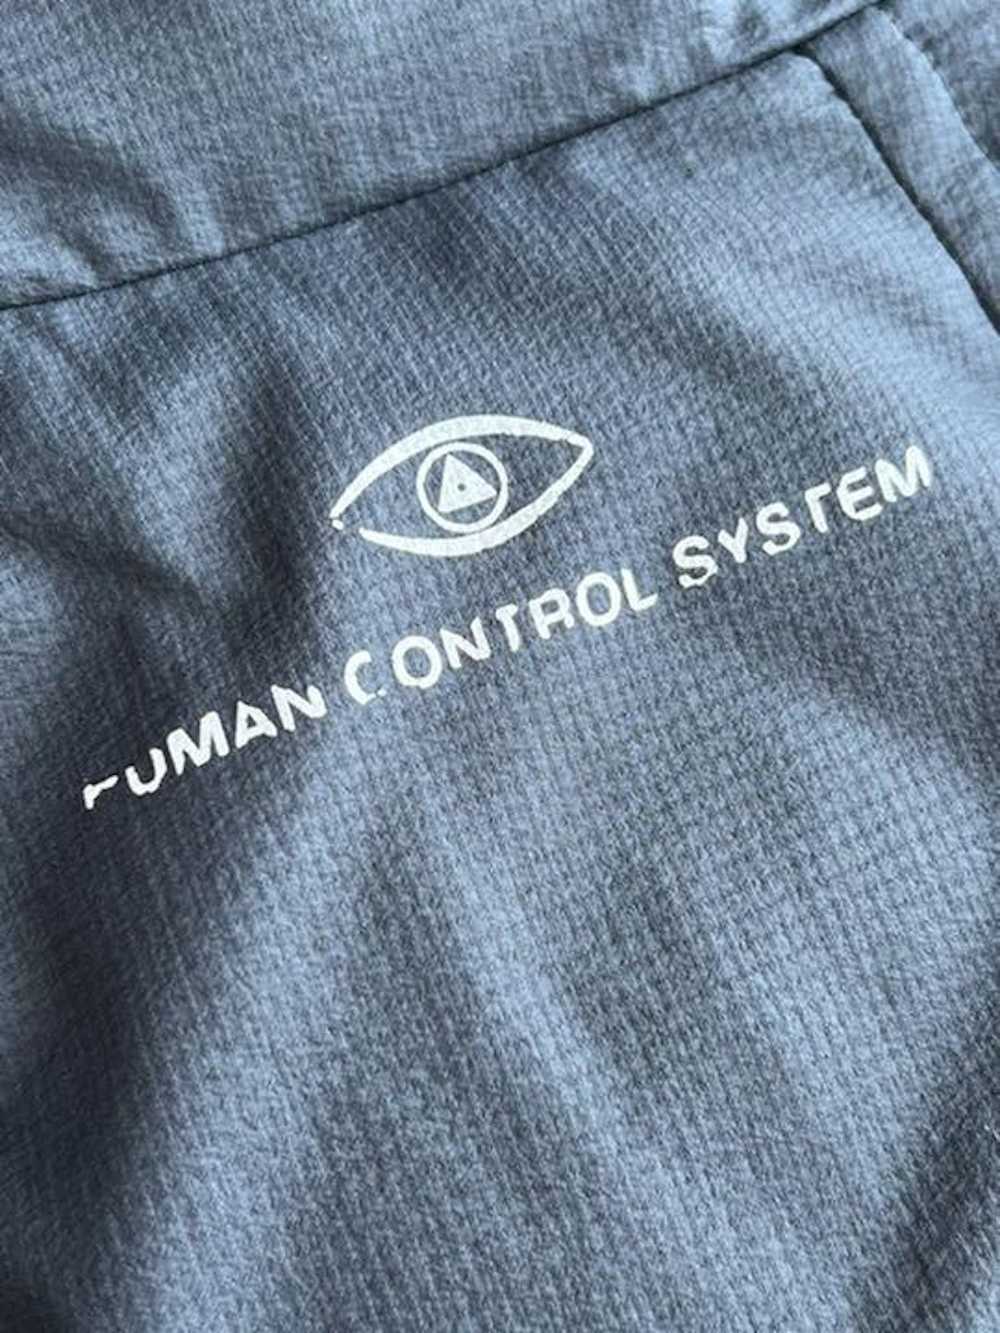 Undercover AW17 "HUMAN CONTROL SYSTEM" Down Vest - image 5